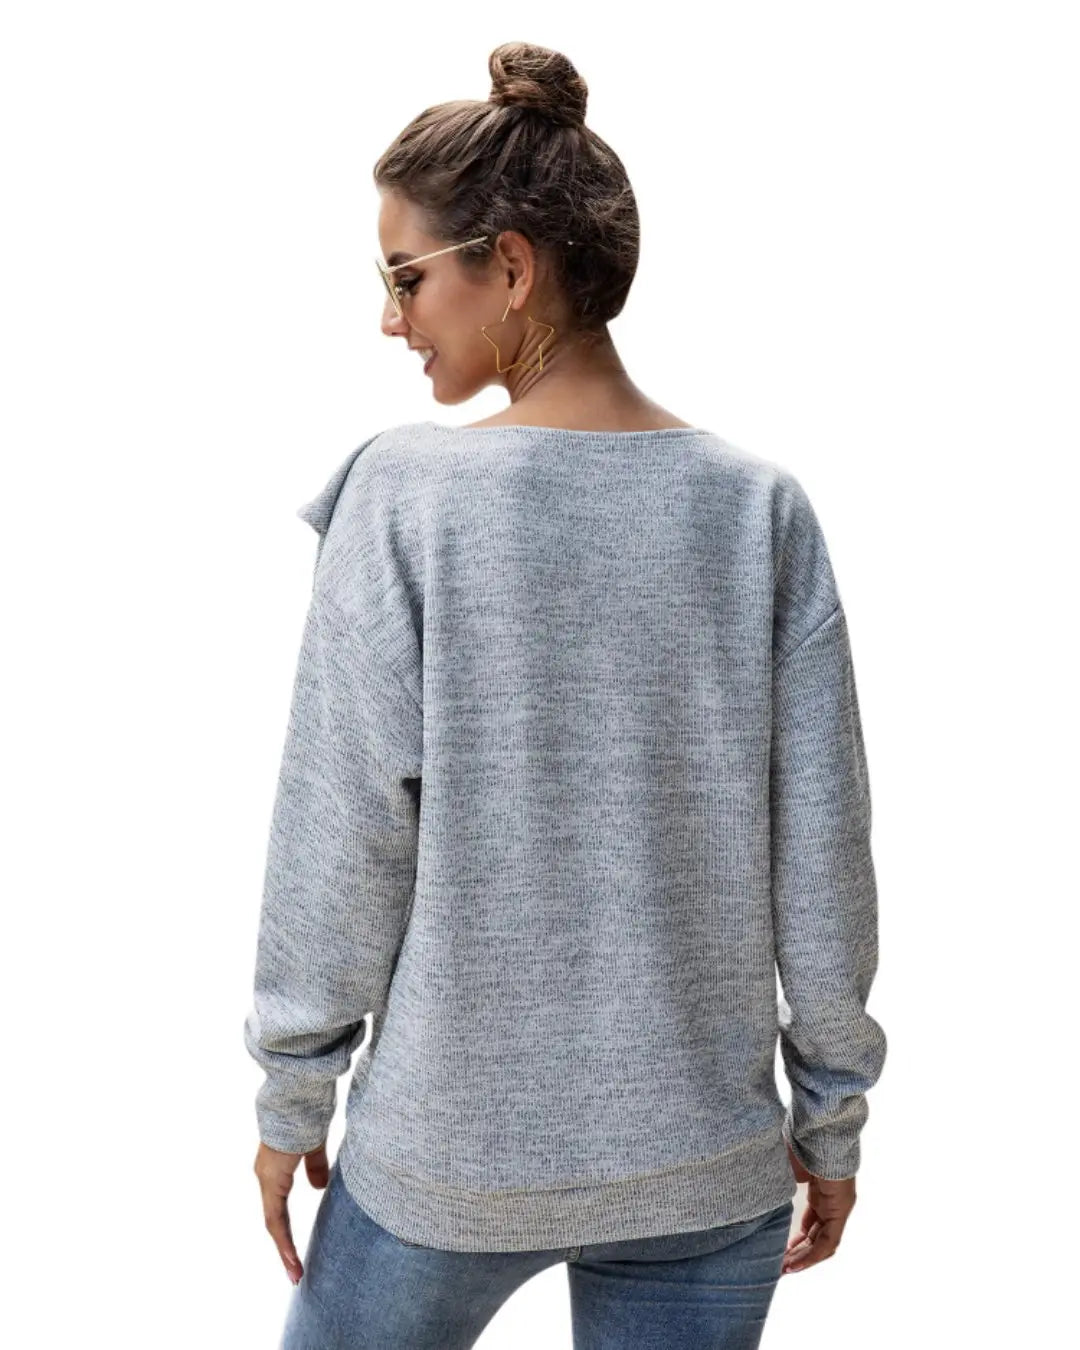 Lovemi - Loose Round Neck Button Thick Sweater Sweater